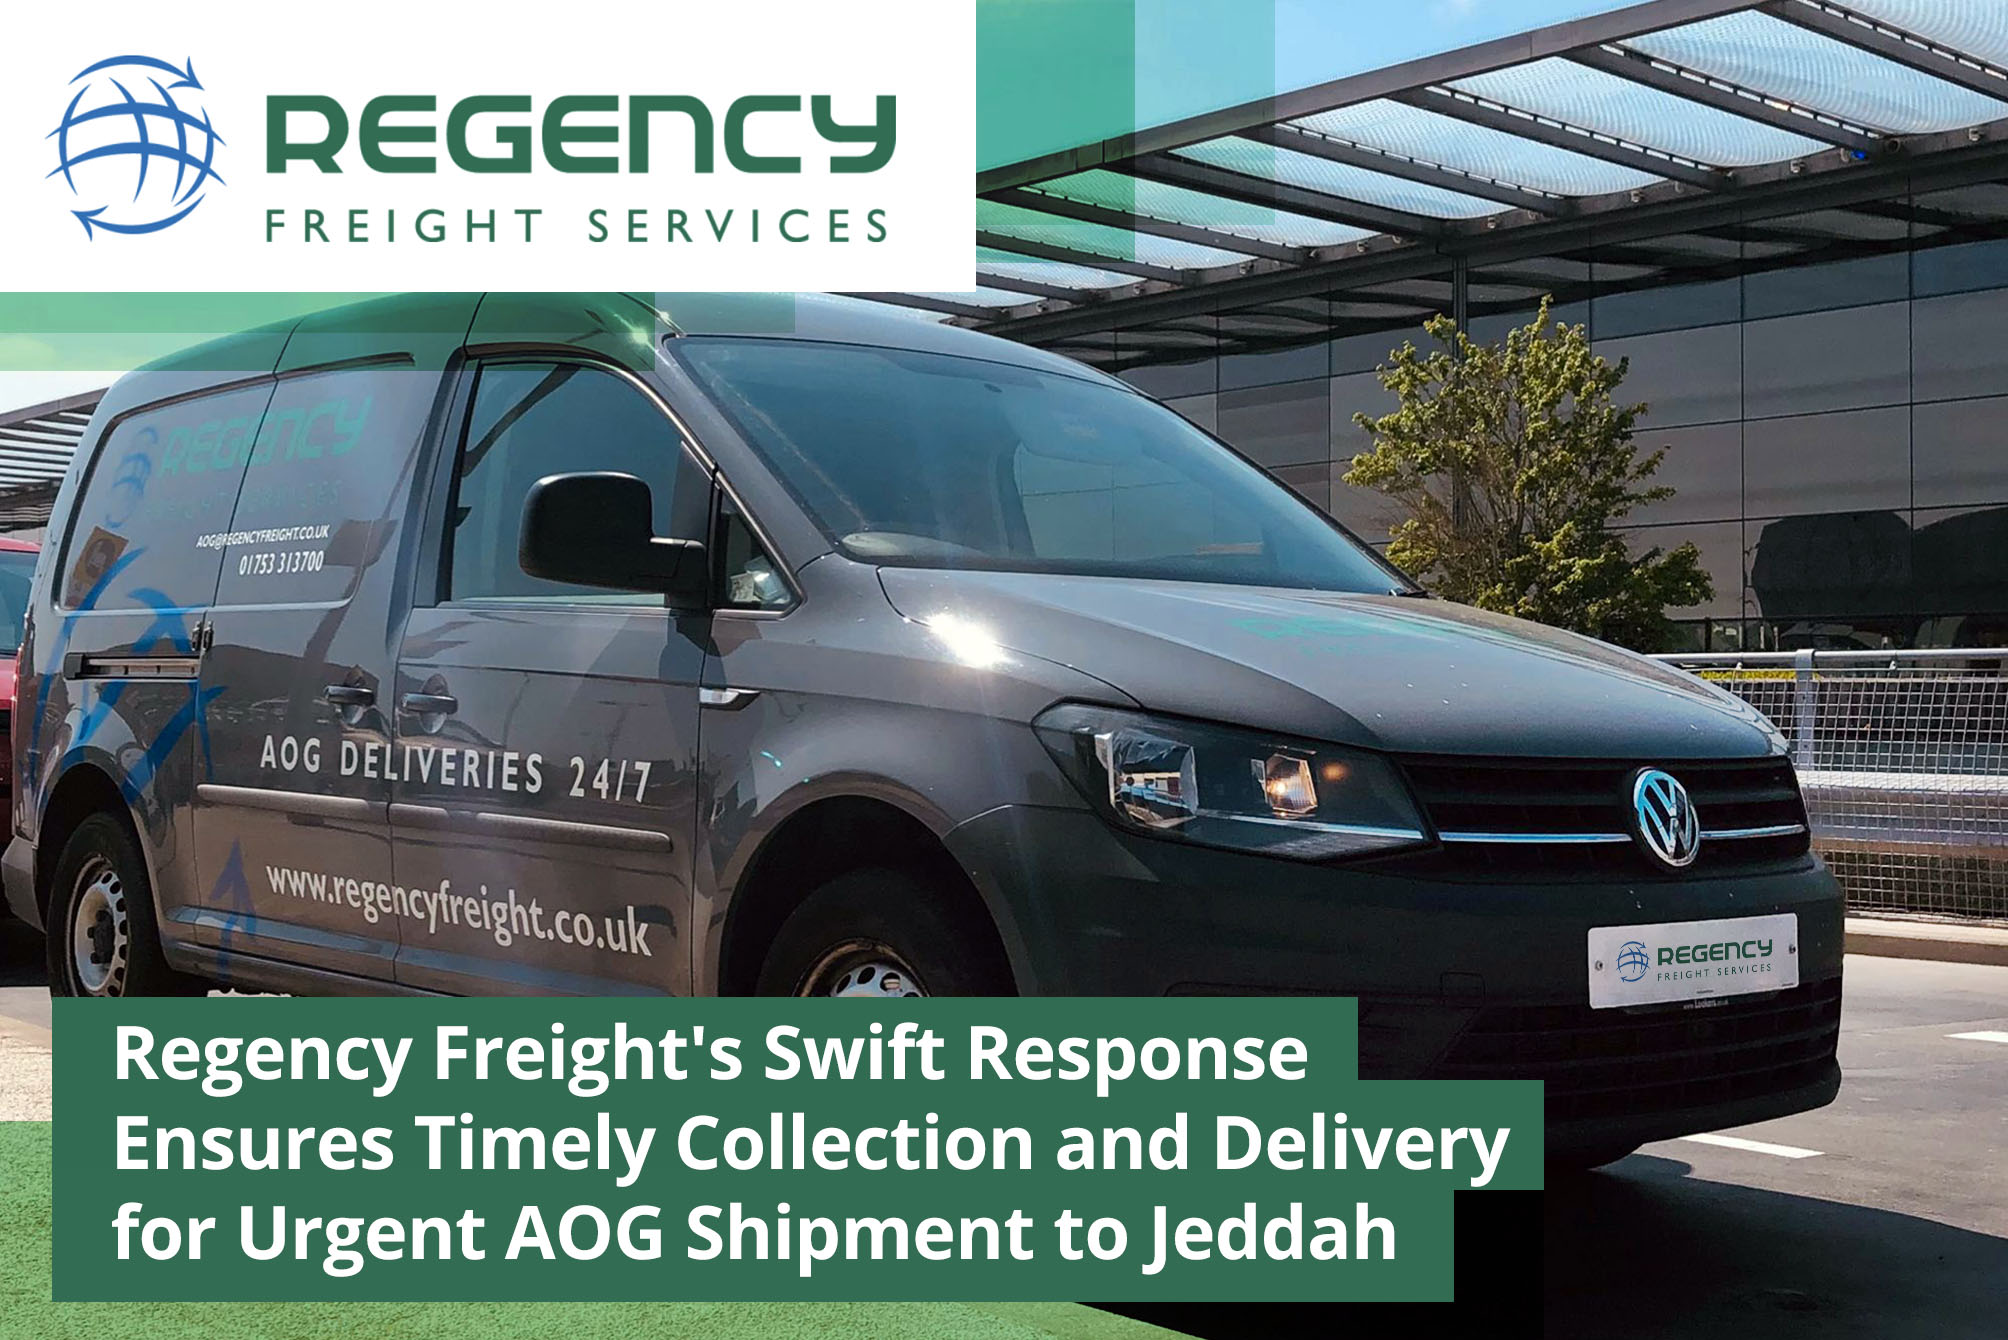 Regency Freight's Swift Response Ensures Timely Collection and Delivery for Urgent AOG Shipment to Jeddah